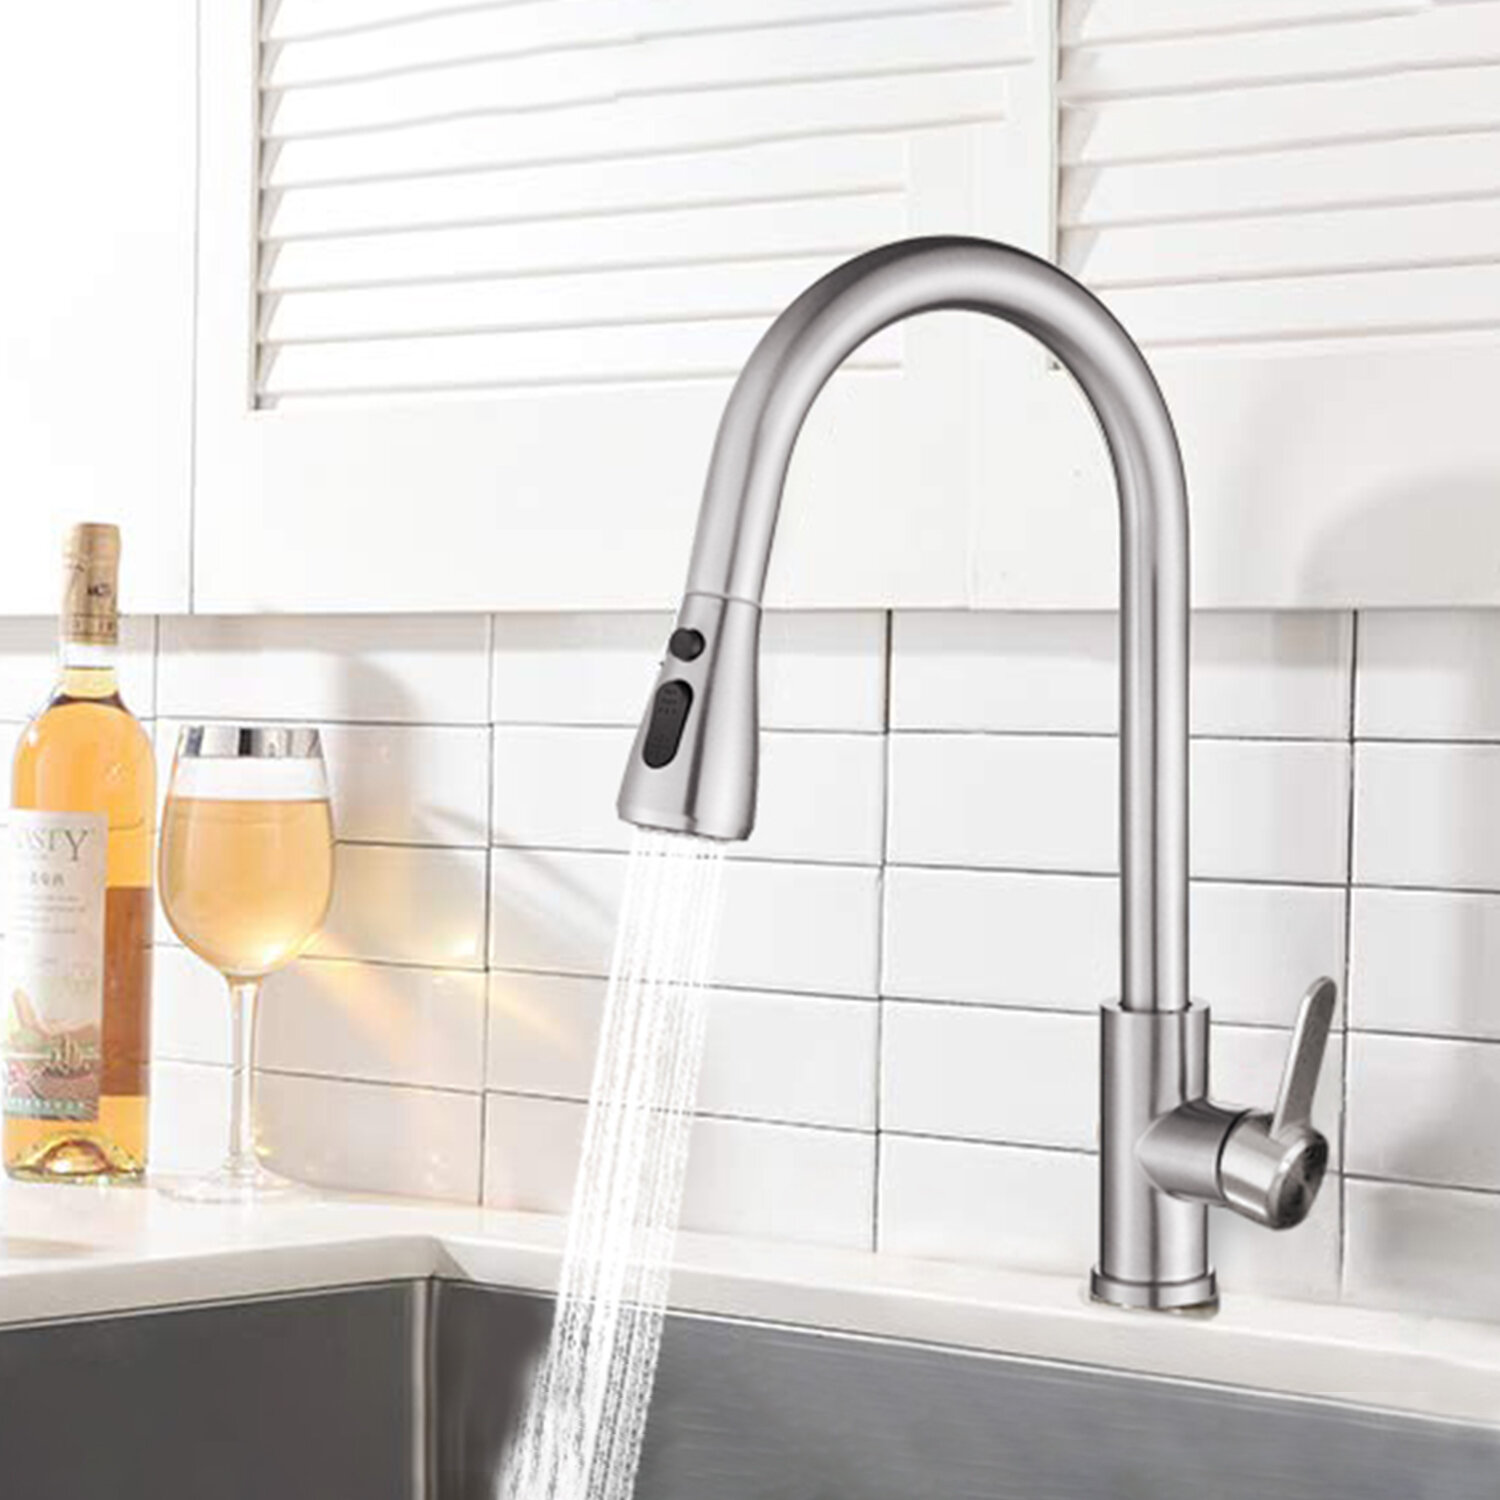 Ruiling Pull Down Touch Single Handle Kitchen Faucet Reviews